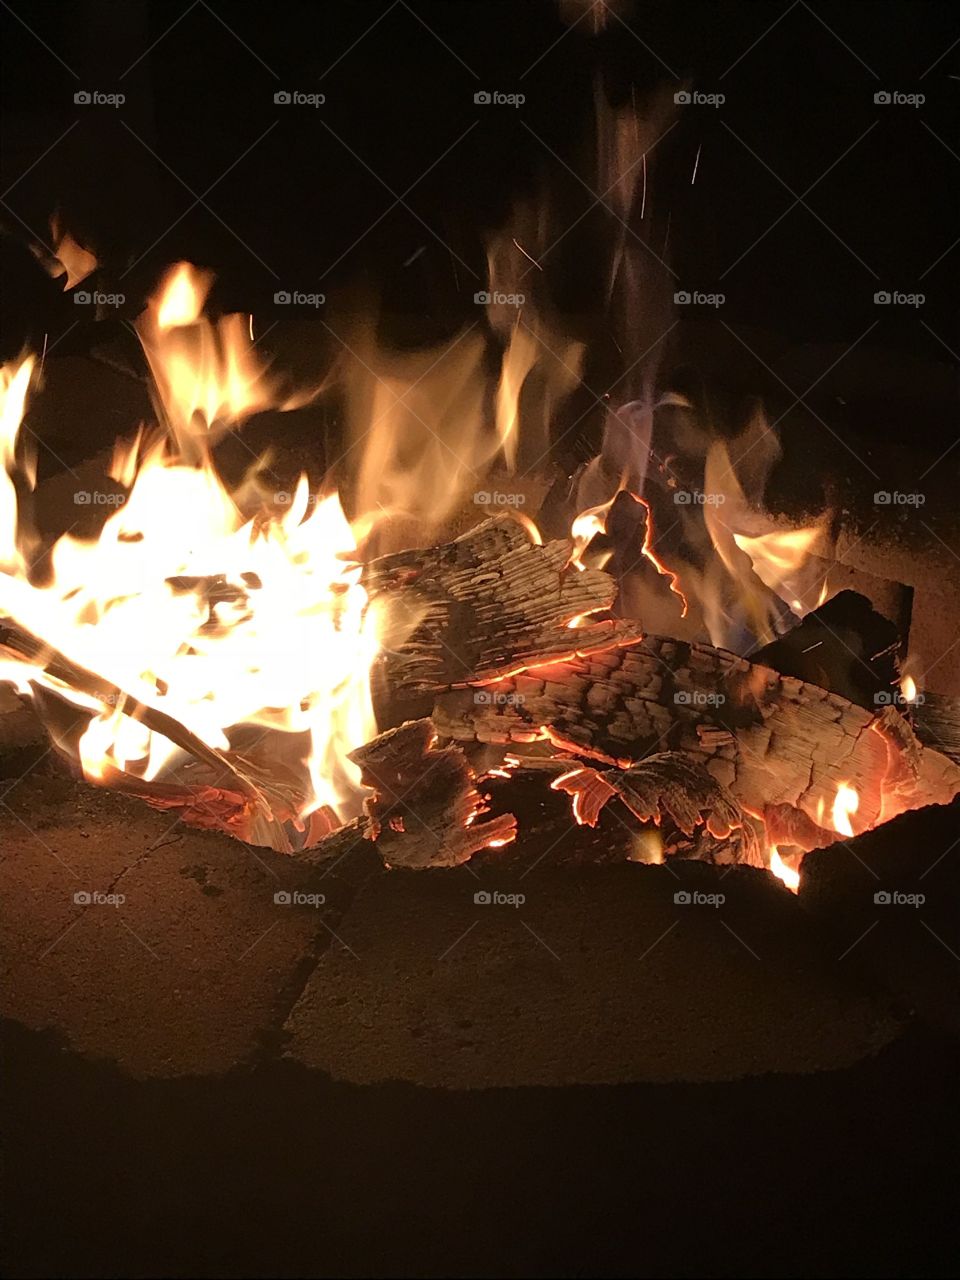 Don’t you just love a warm camp fire on a late Sunday night! That’s the energy everyone has to get a taste of! 